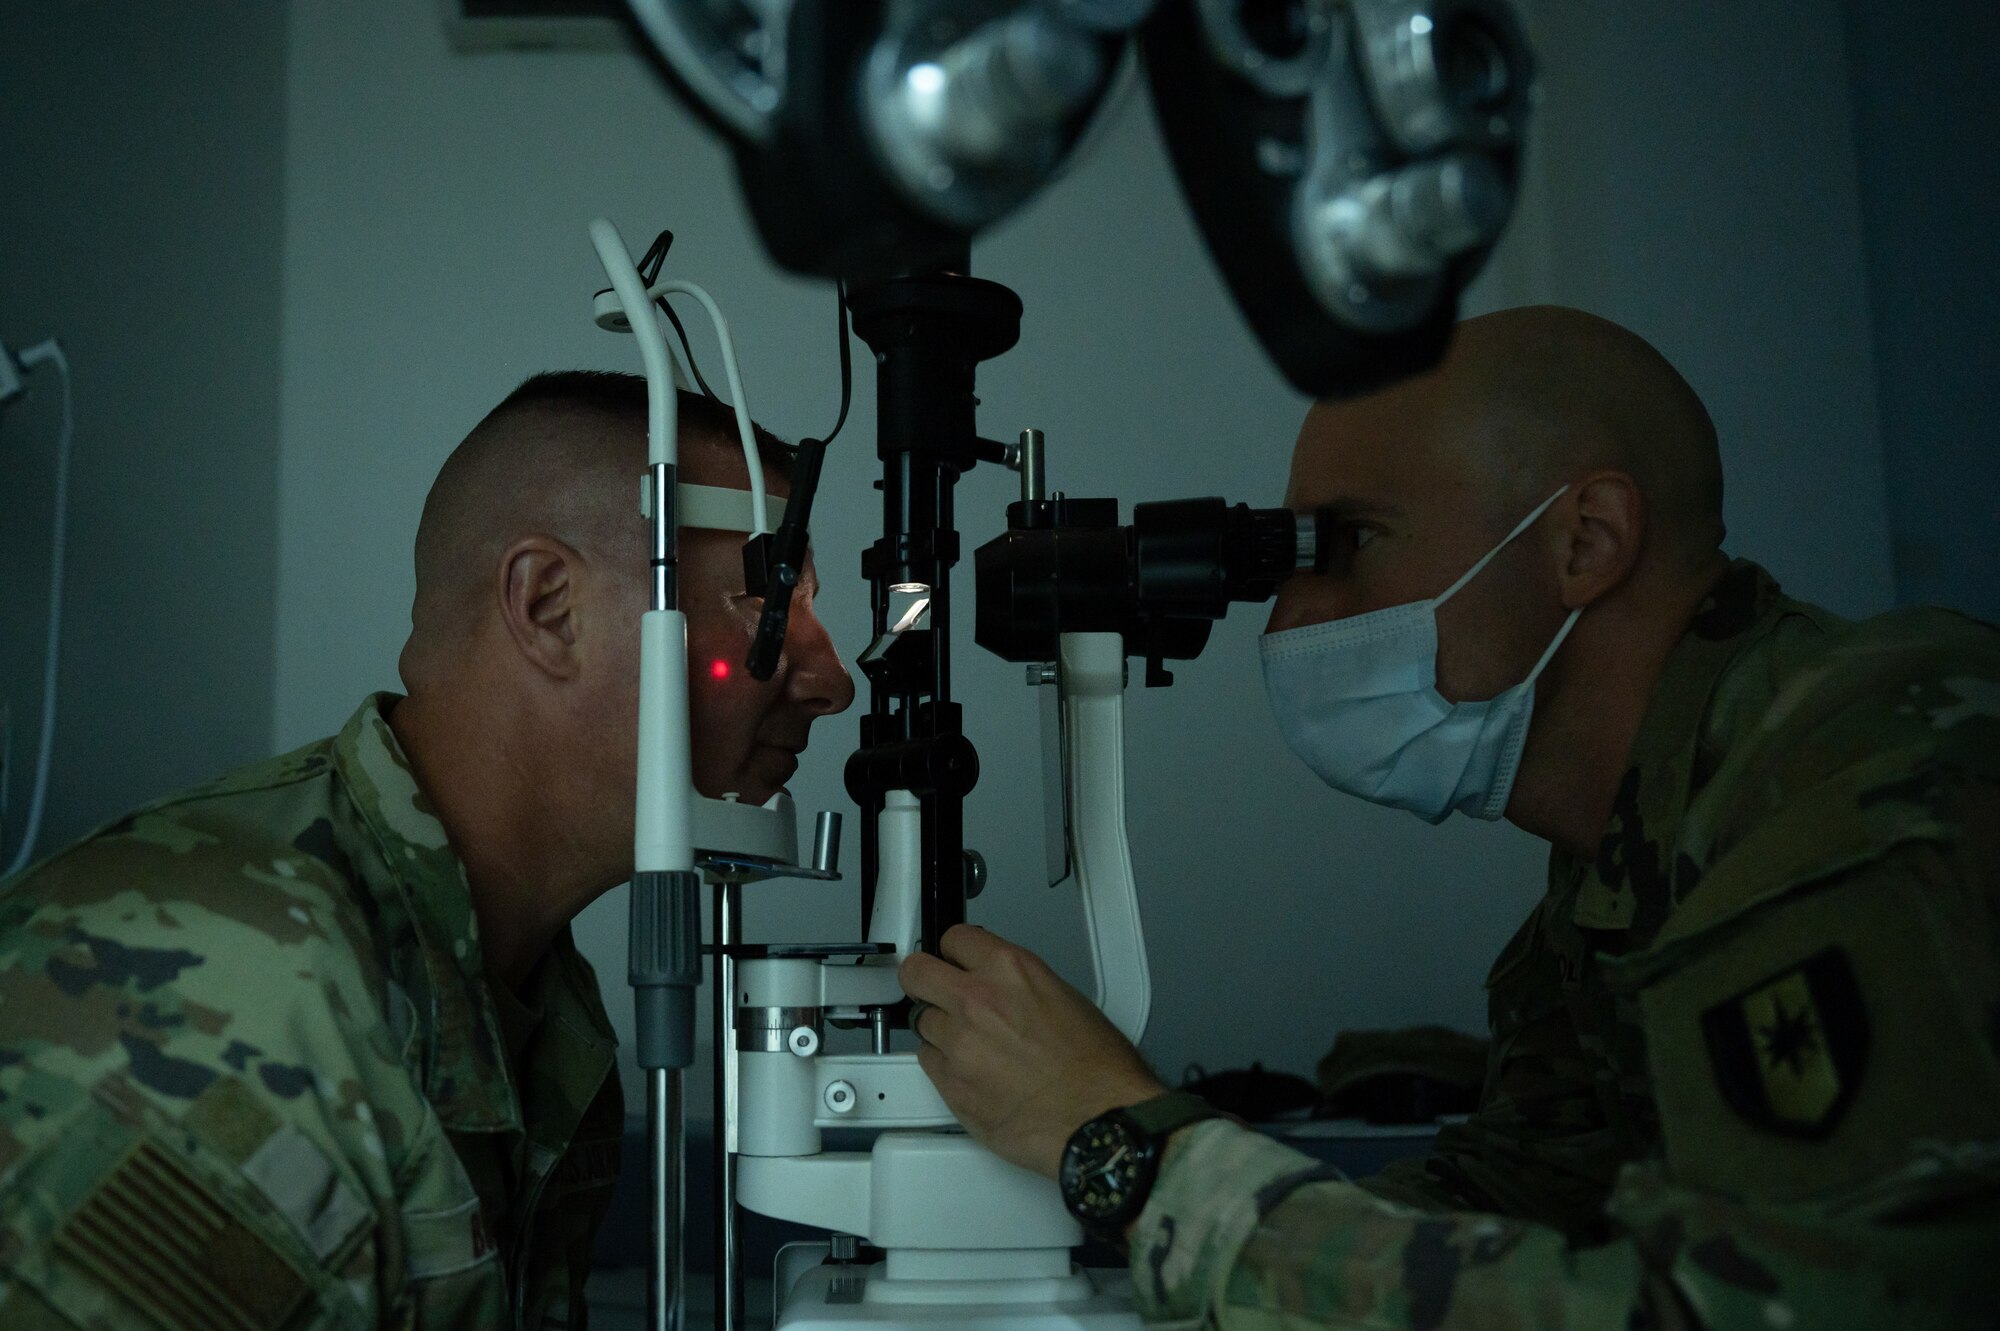 The 386th Expeditionary Medical Group hosted an optometry clinic for service members experiencing vision changes in their previous prescription or new changes that may require glasses.  It's important to have an optometry clinic available for vision readiness.